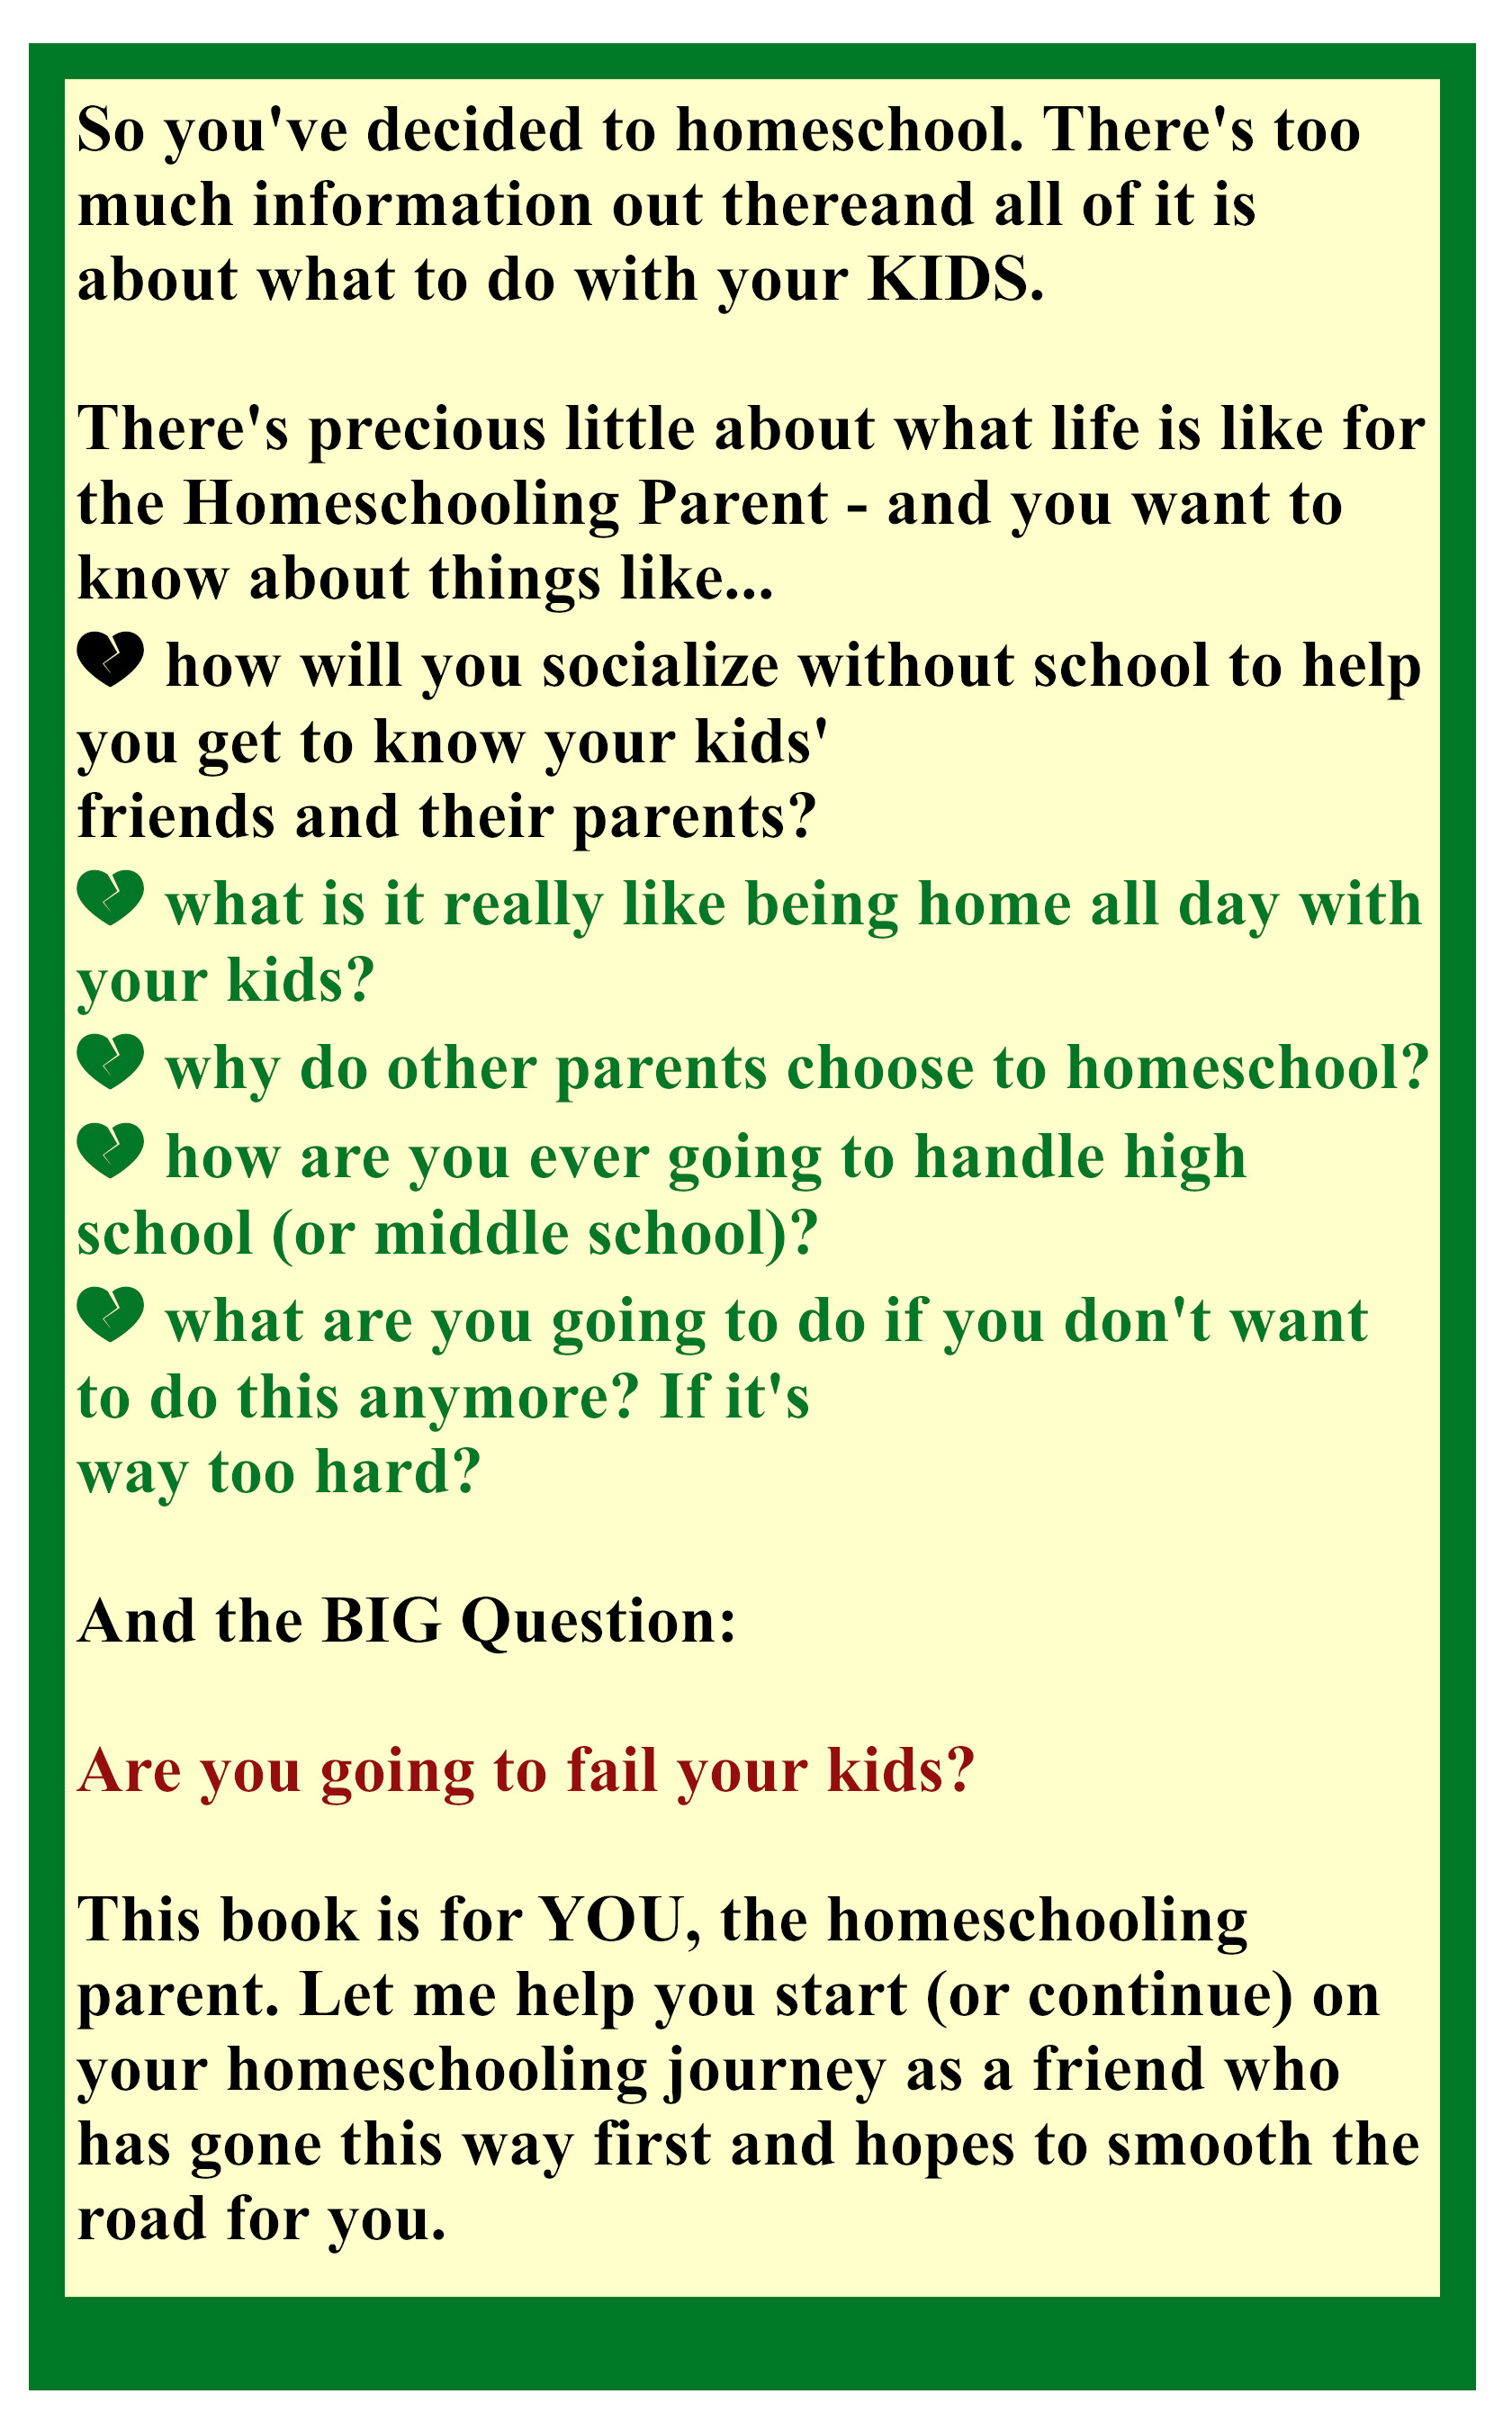 Back Blurb for book: The Homeschooling Parent: Self-Care and Feeding of the Person Who Makes It All Happen